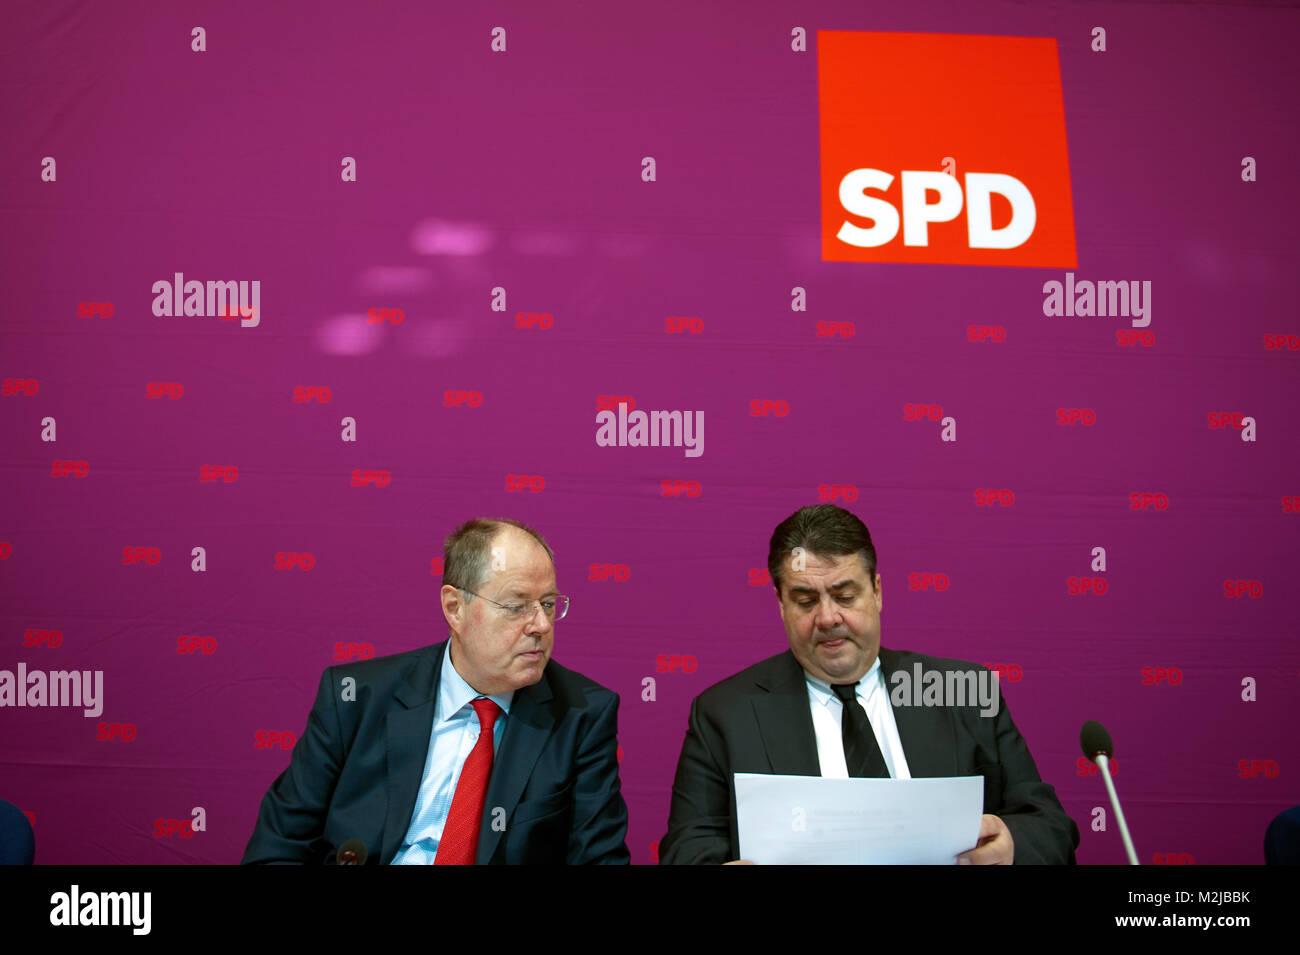 SPD party executive meeting. Social Democratic Party of Germany is a social-democratic political party in Germany. Peer Steinbrück and Sigmar Gabriel talking before the meeting. Stock Photo